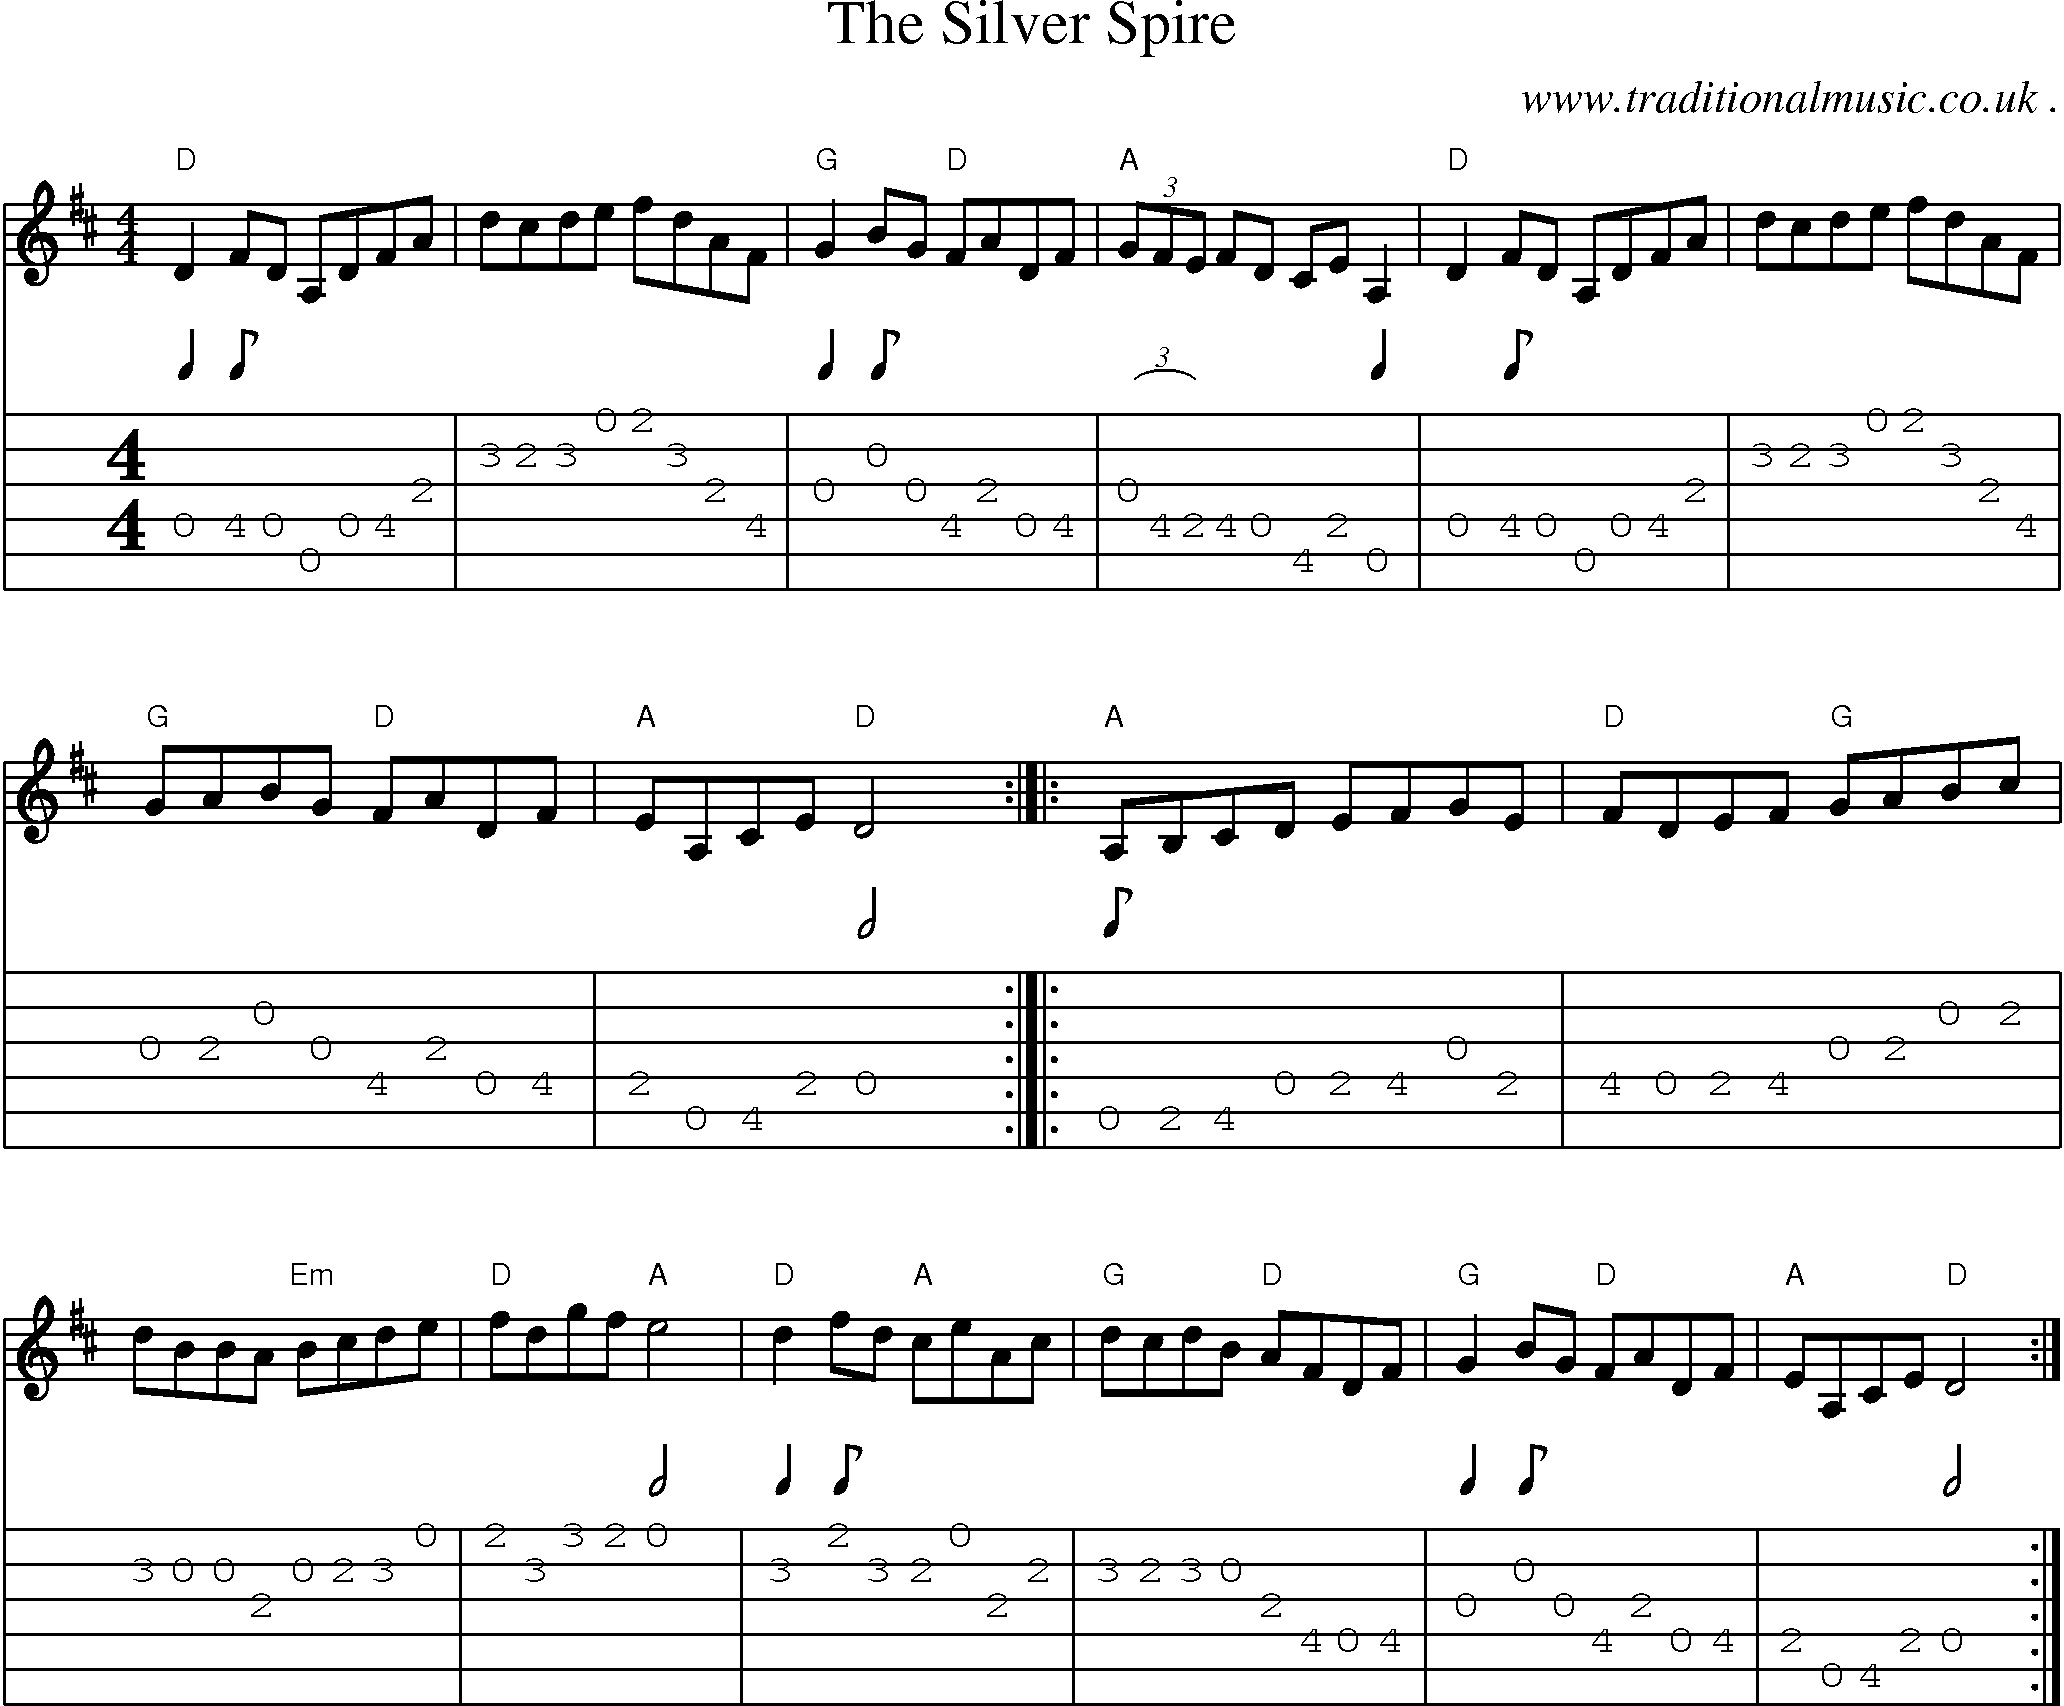 Music Score and Guitar Tabs for The Silver Spire